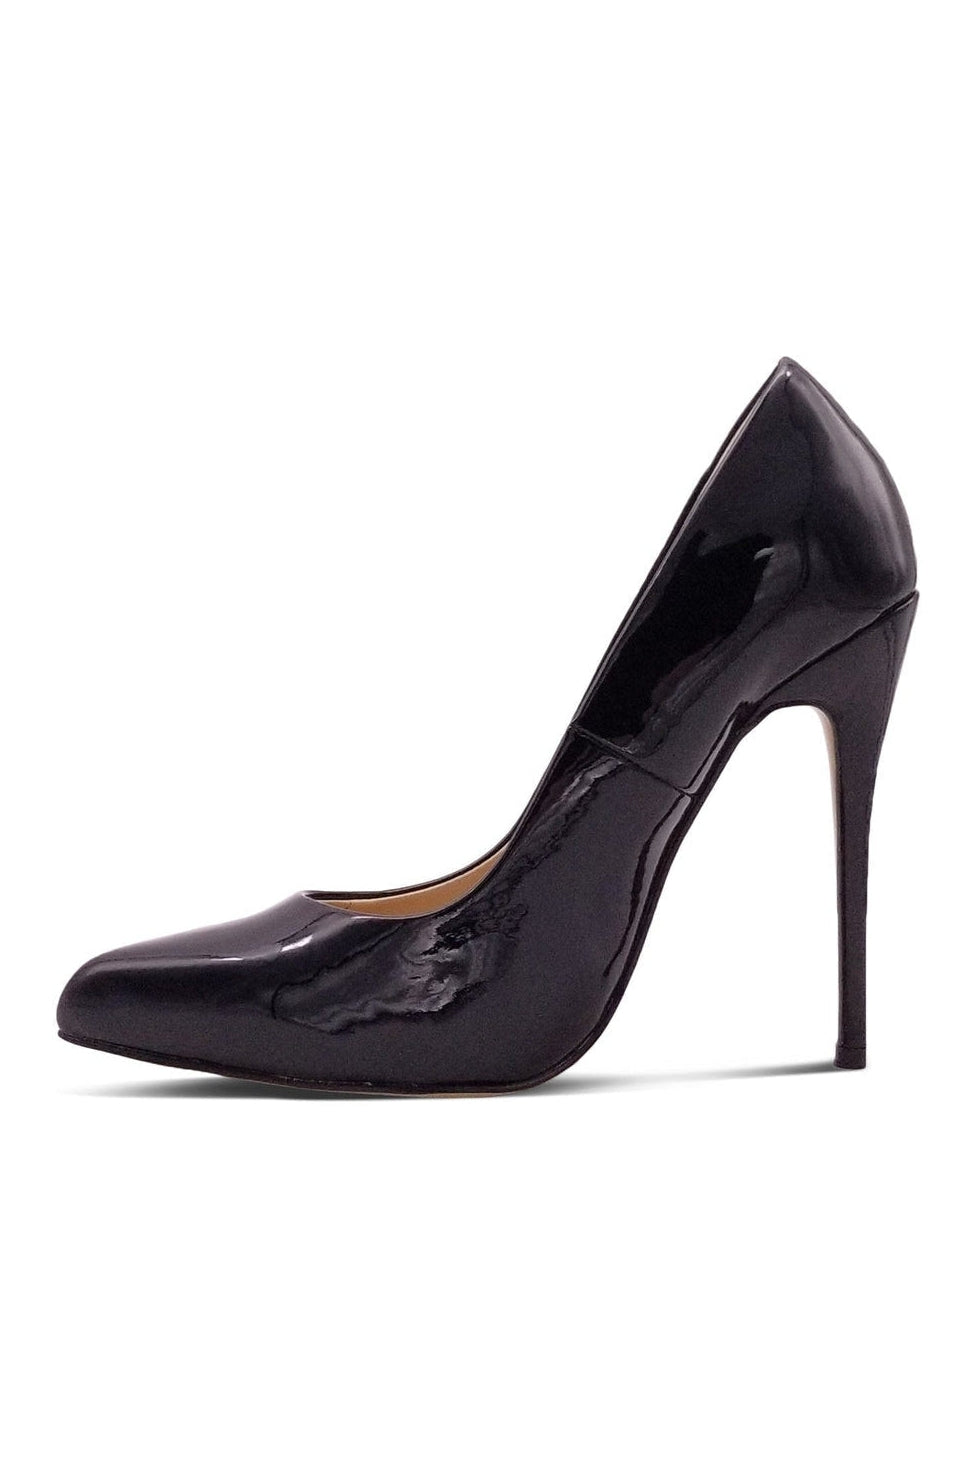 Sultry Low Cut Sky High Stiletto Heel Pump-Pumps-Sexyshoes Signature-Black-SEXYSHOES.COM